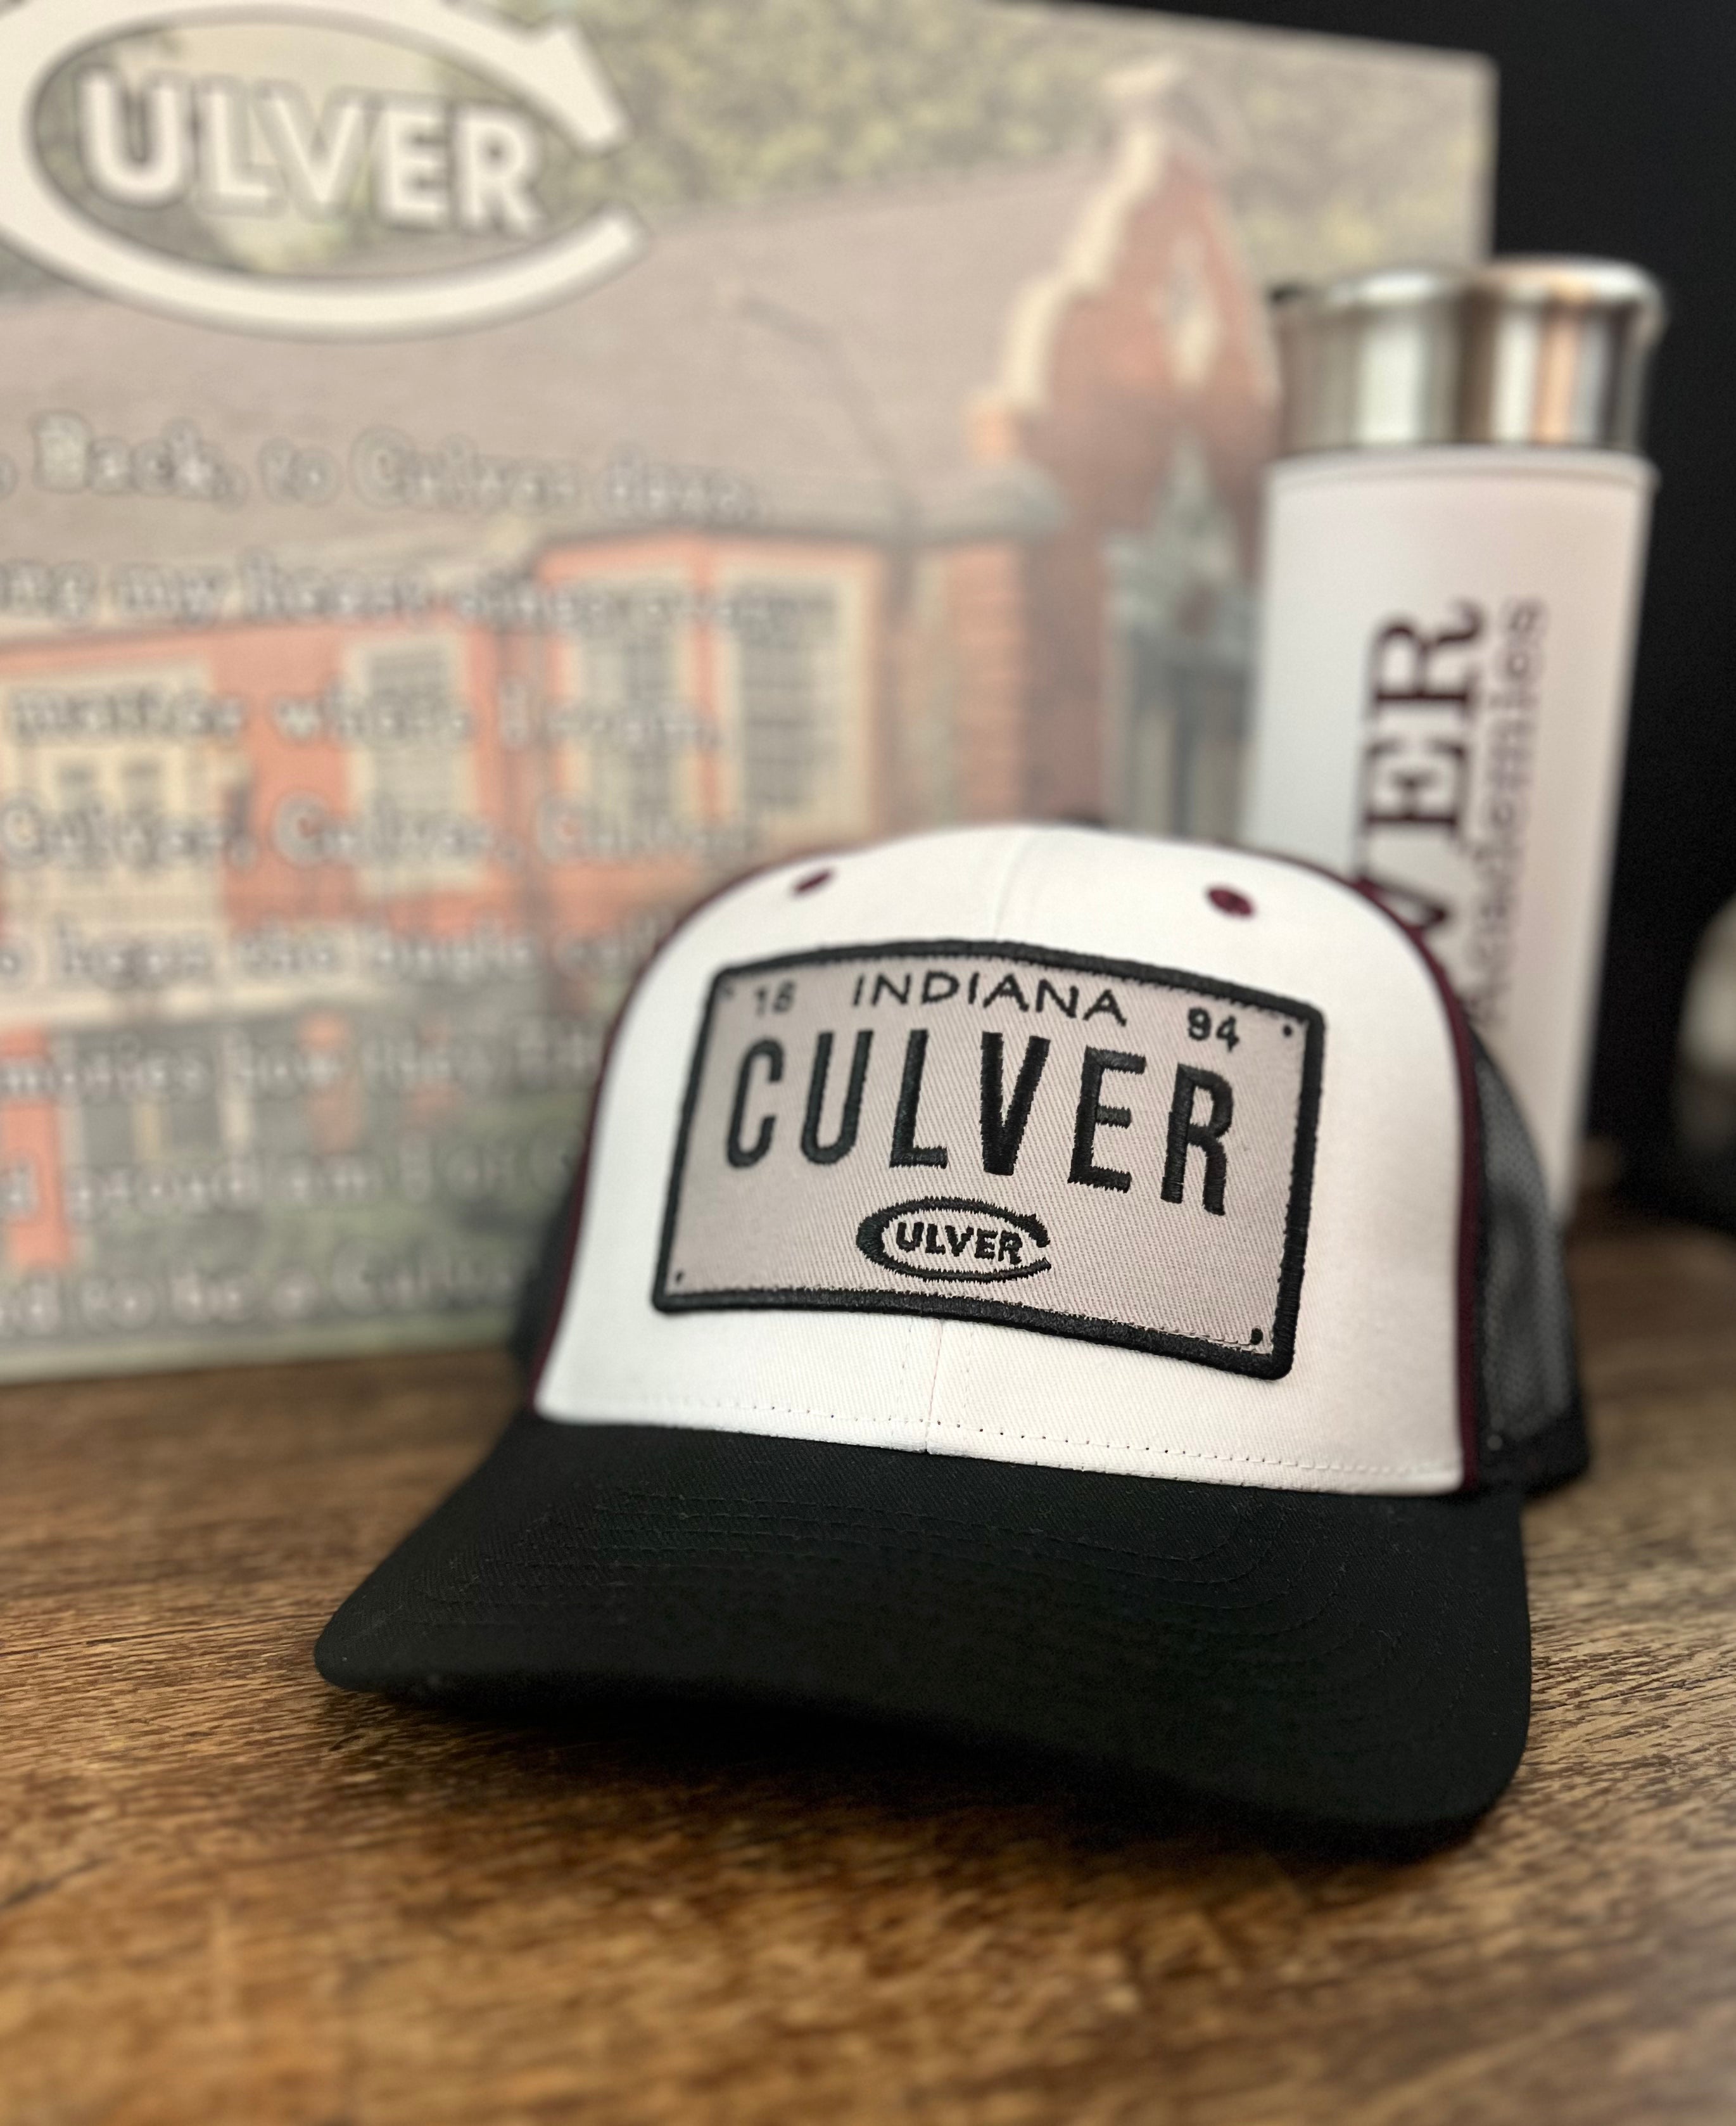 Culver License Plate Everyday Trucker Hat - Black with Maroon Piping